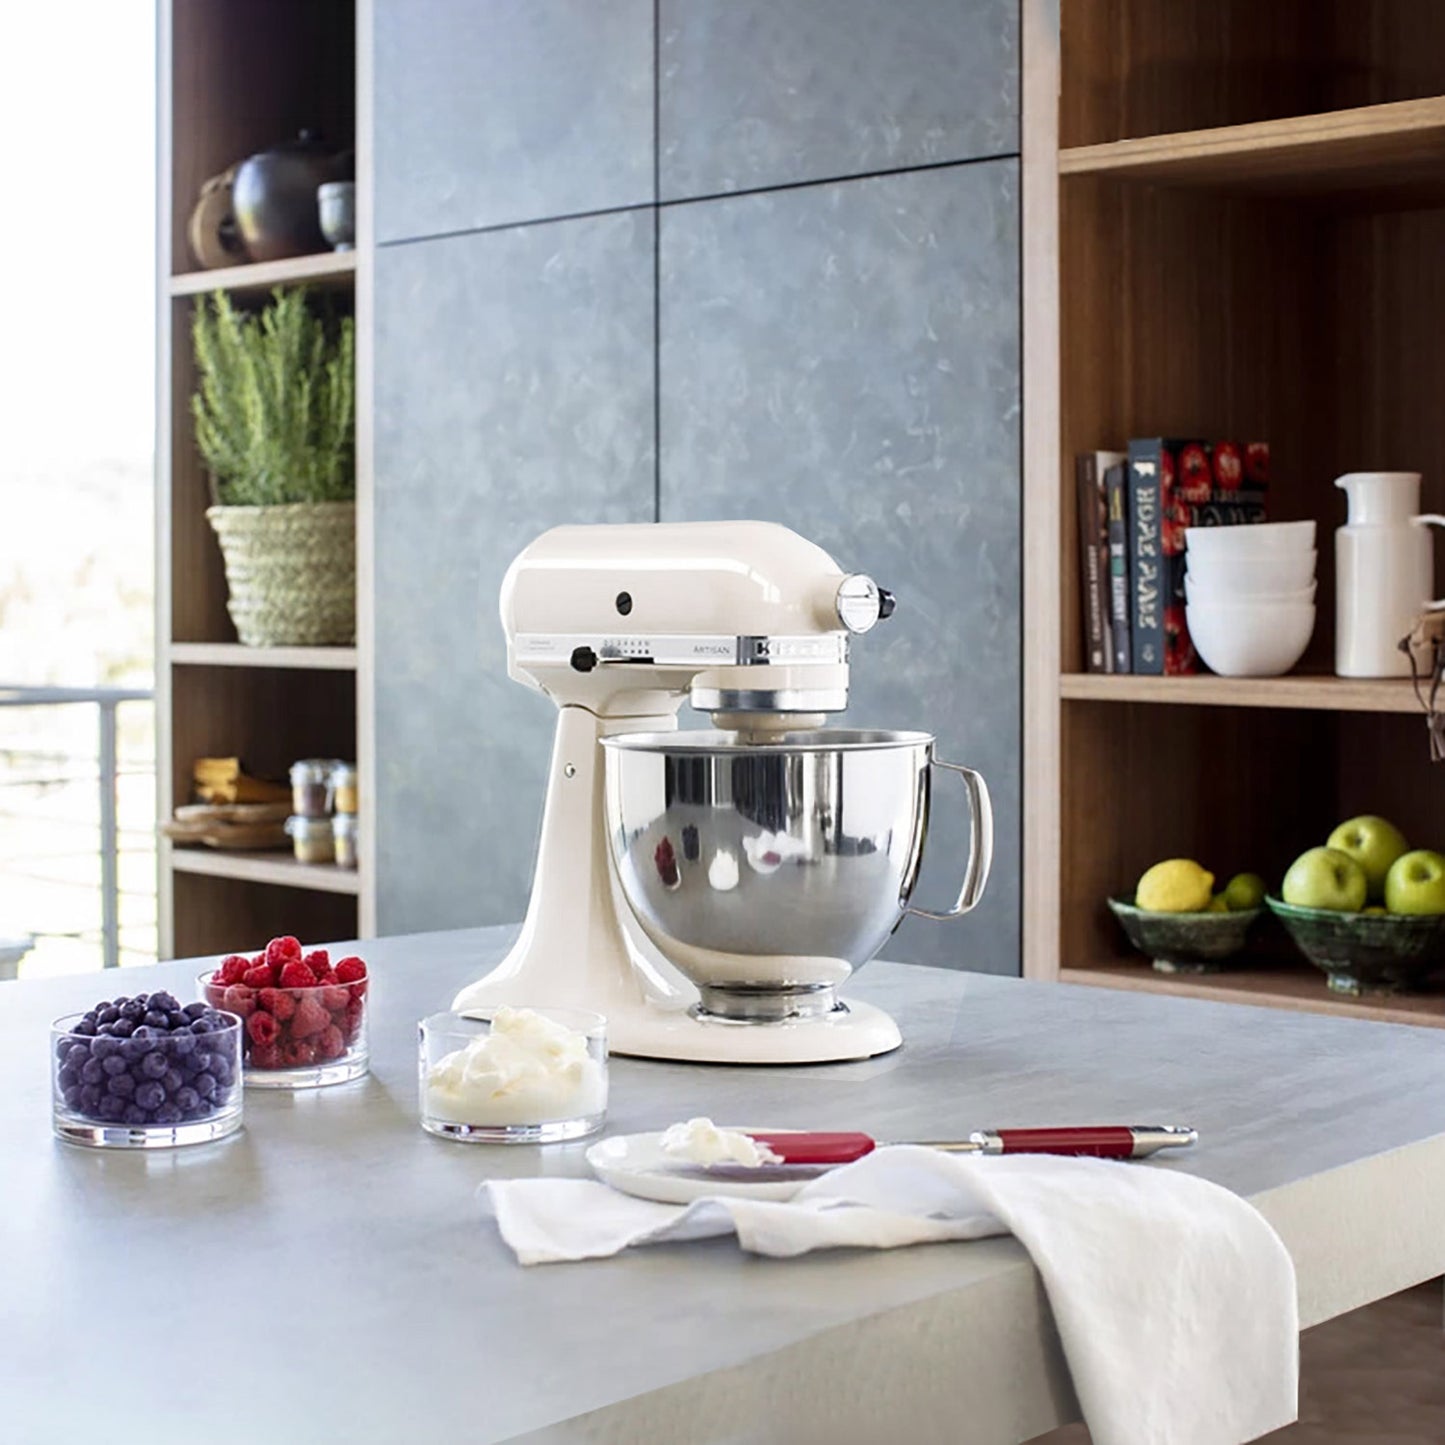 KitchenAid ™ Artisan Mixer 4.8L Porcelain White - Includes Wire Whisk, Dough Hook and Flat Beater (SKSM125BPL)